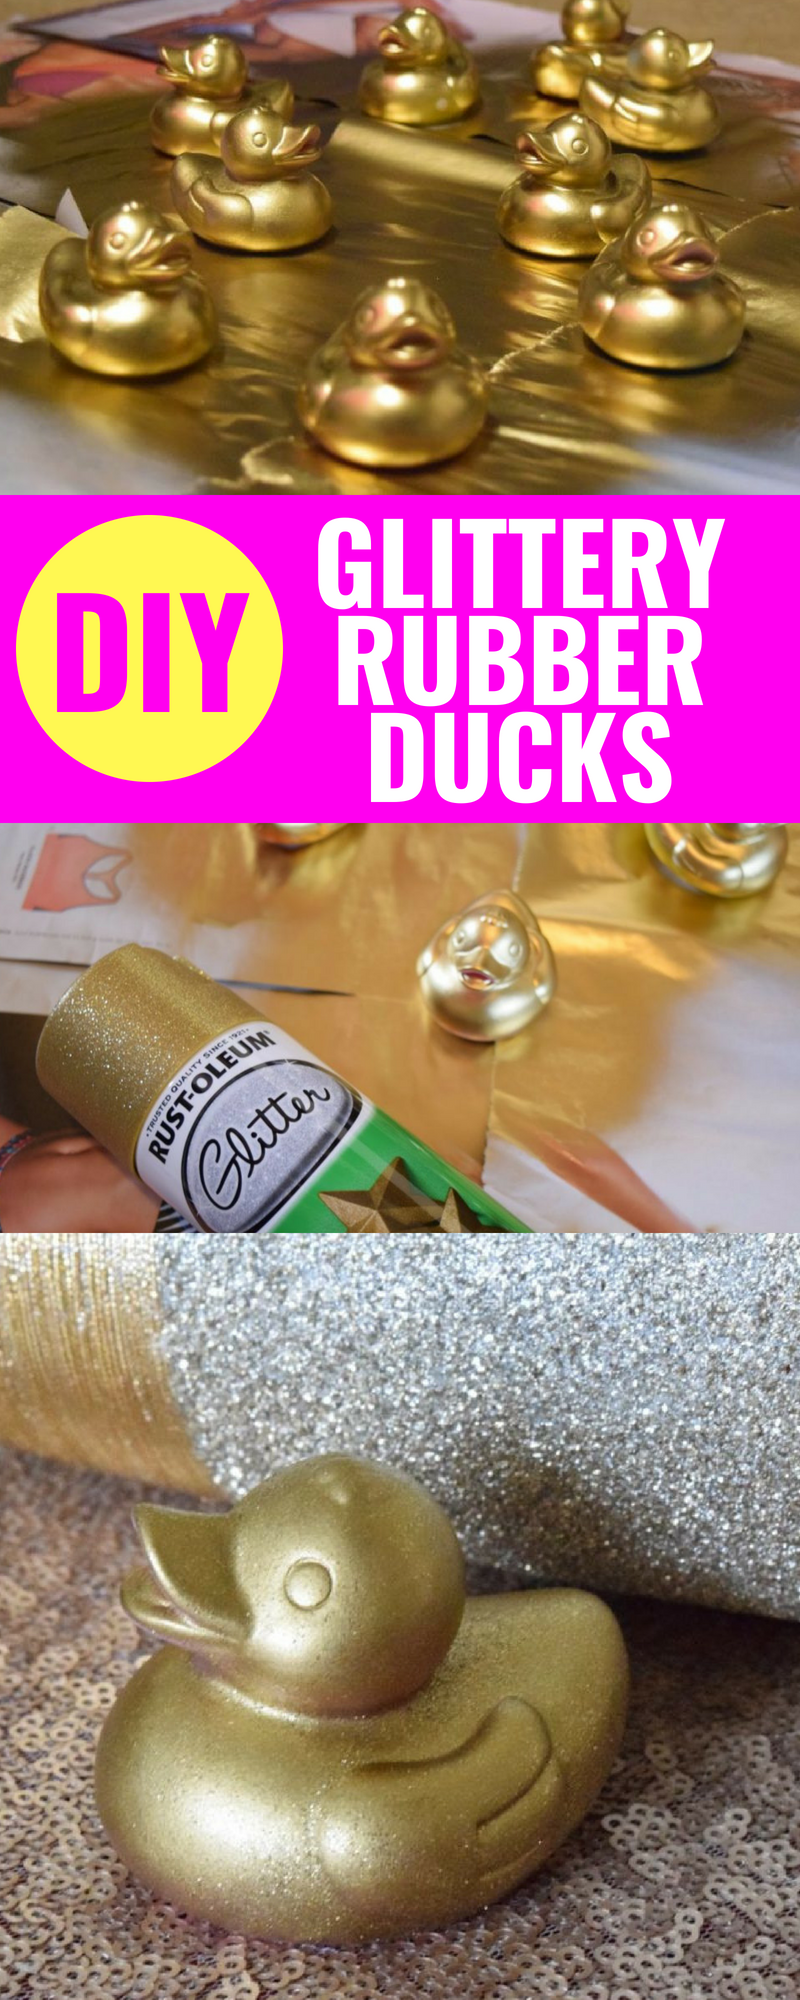 DIY Glittery Rubber Ducks - Get ready for your next party to sparkle with these easy DIY sparkly rubber ducks! - Rubber Ducks - Baby Shower Idea - Spray Paint Craft - Communikait by Kait Hanson #babyshower #rubberduck #craft #diy